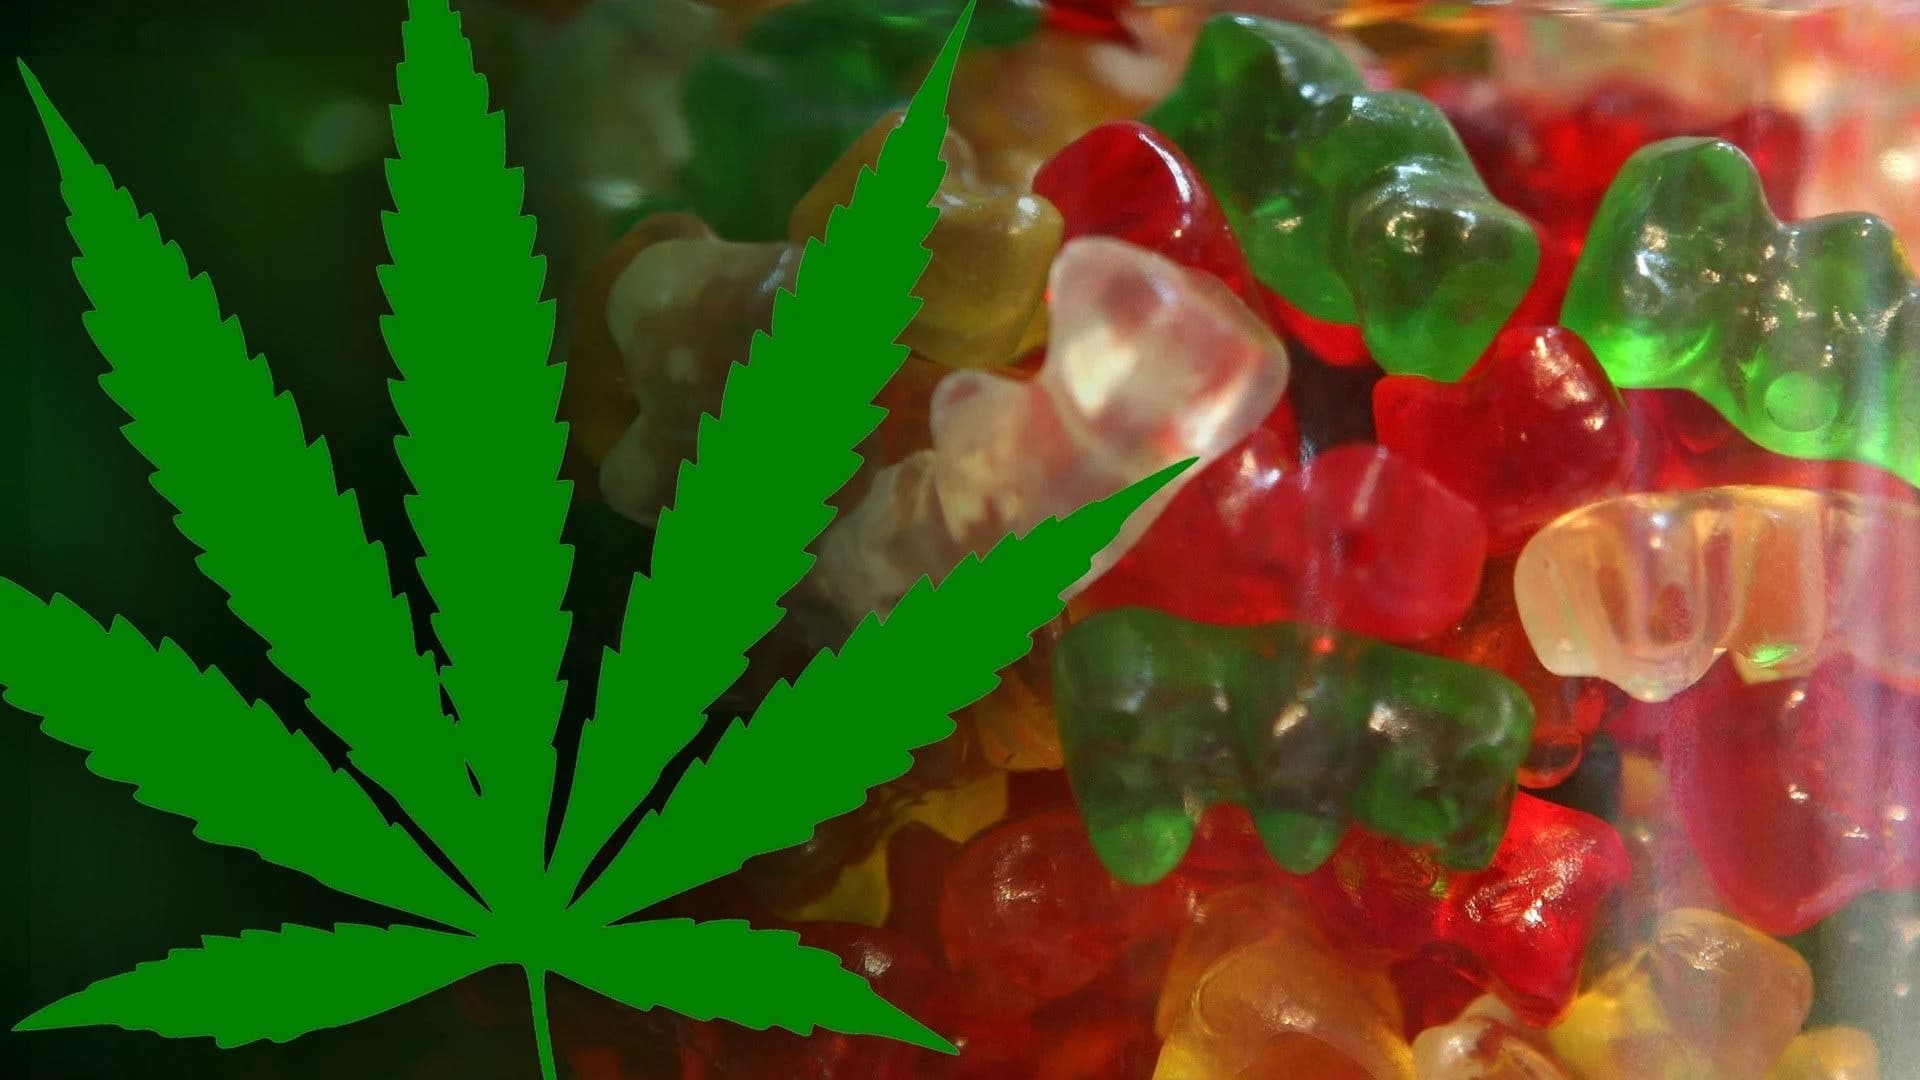 Police: Classmate gives teen weed gummy bears to ‘stop her from stressing out’